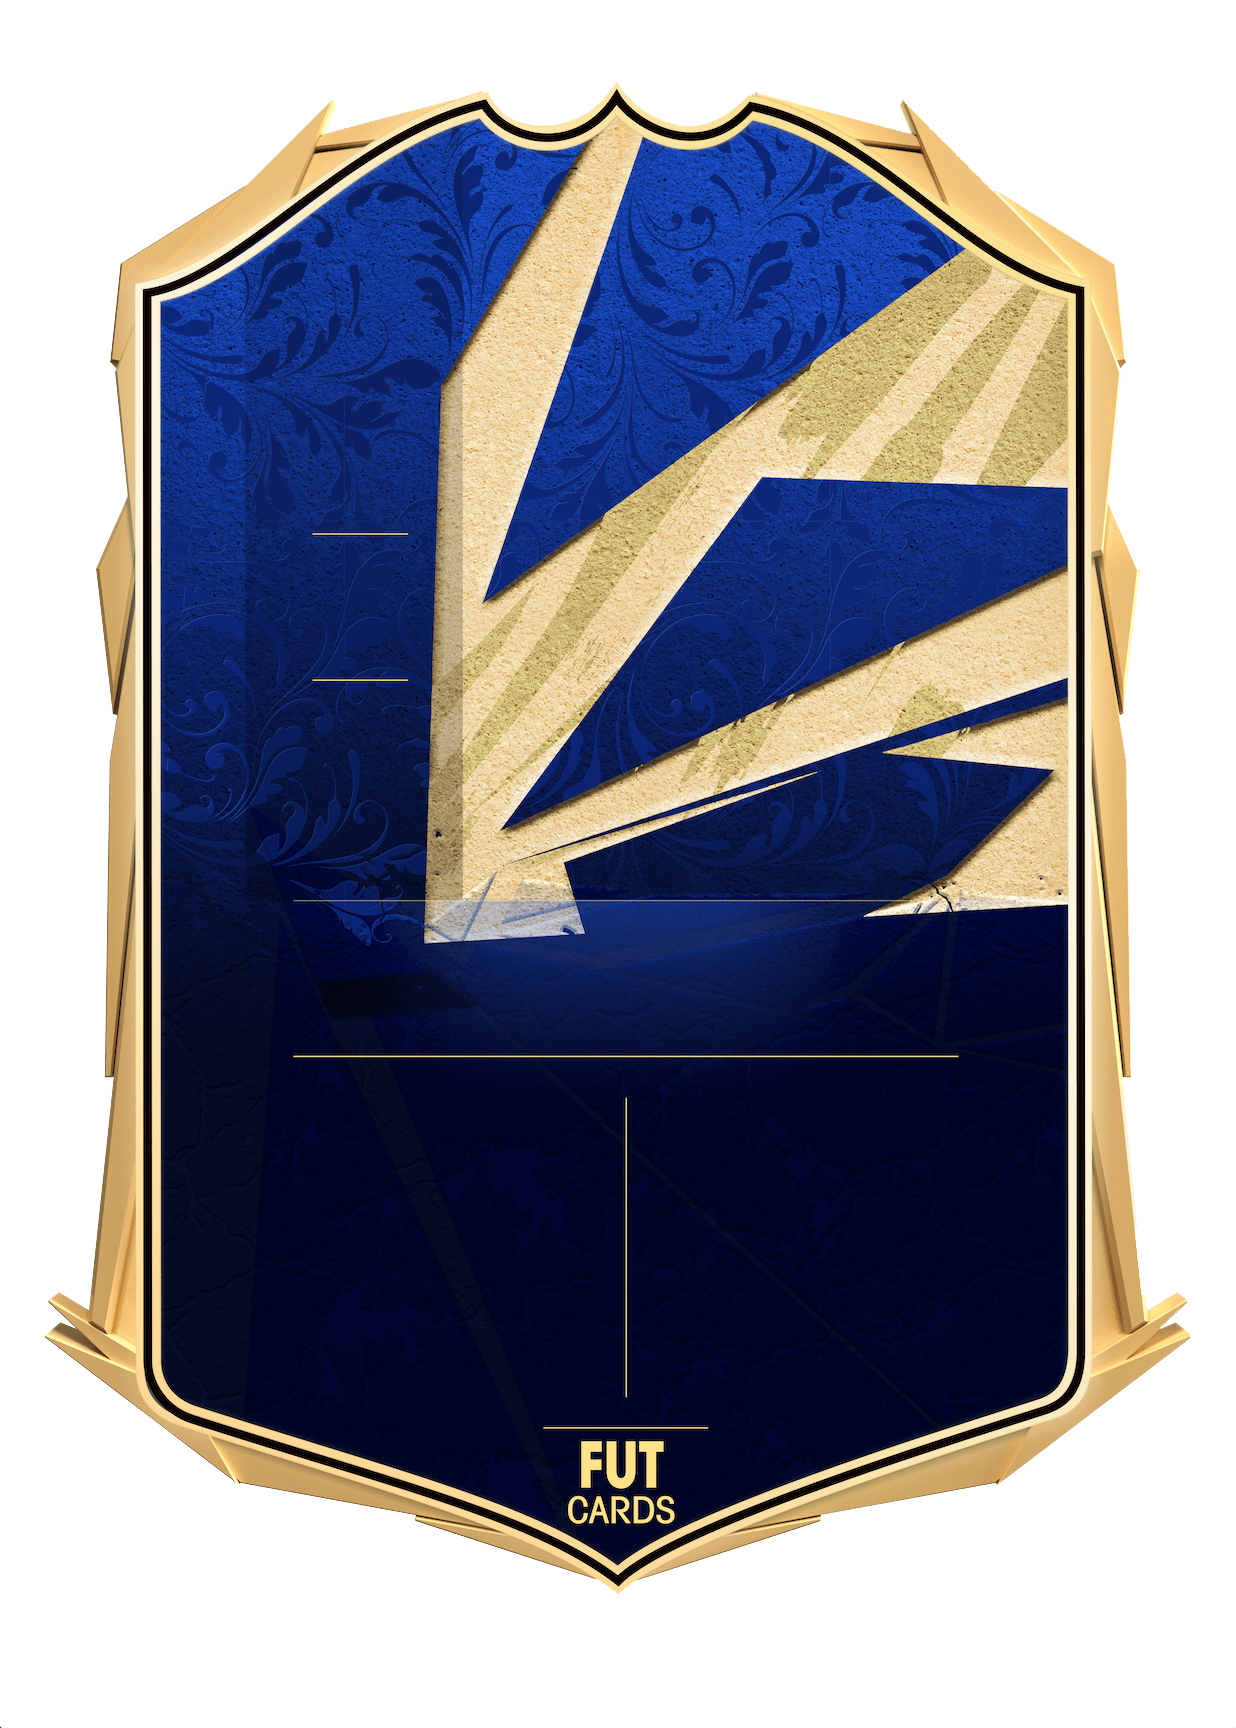 Team Of The Year (TOTY) Futcards FIFA